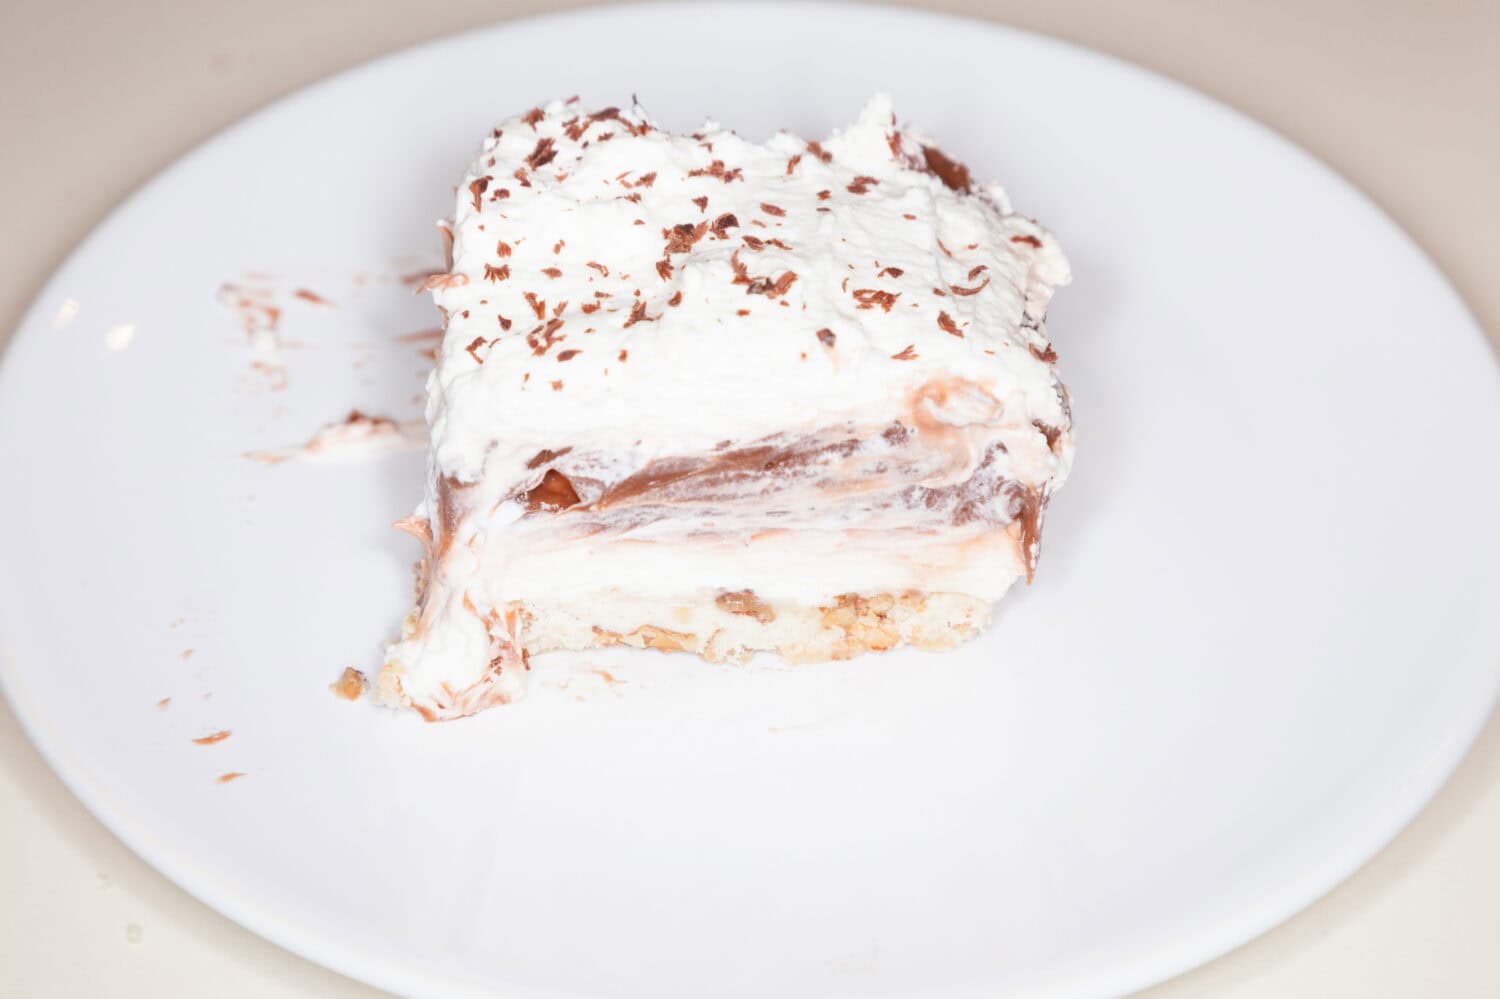 This is a creamy pudding-like pie. It has thick chocolate filling, thick cream cheese filling, a butter/nut crust, and is topped with whipped cream.